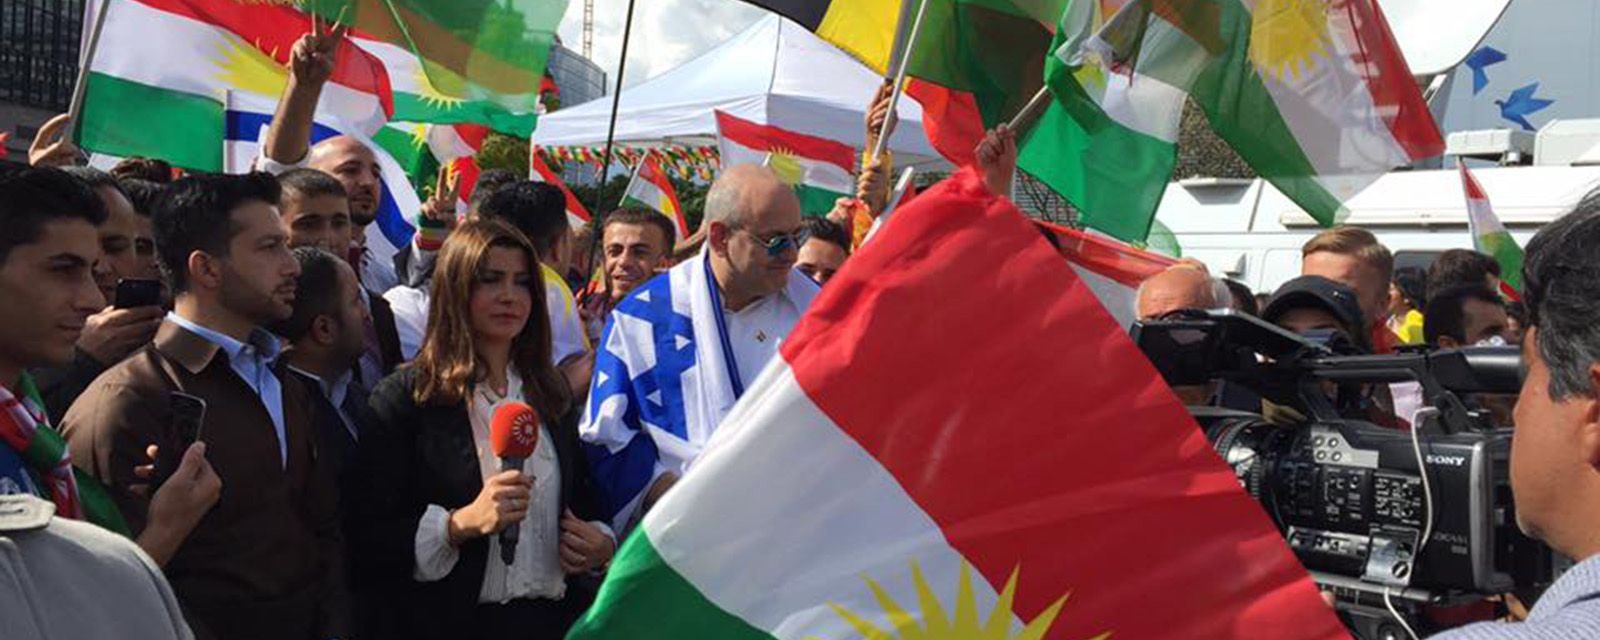 NEW JEWISH GROUP SUPPORTS INDEPENDENCE FOR KURDISTAN